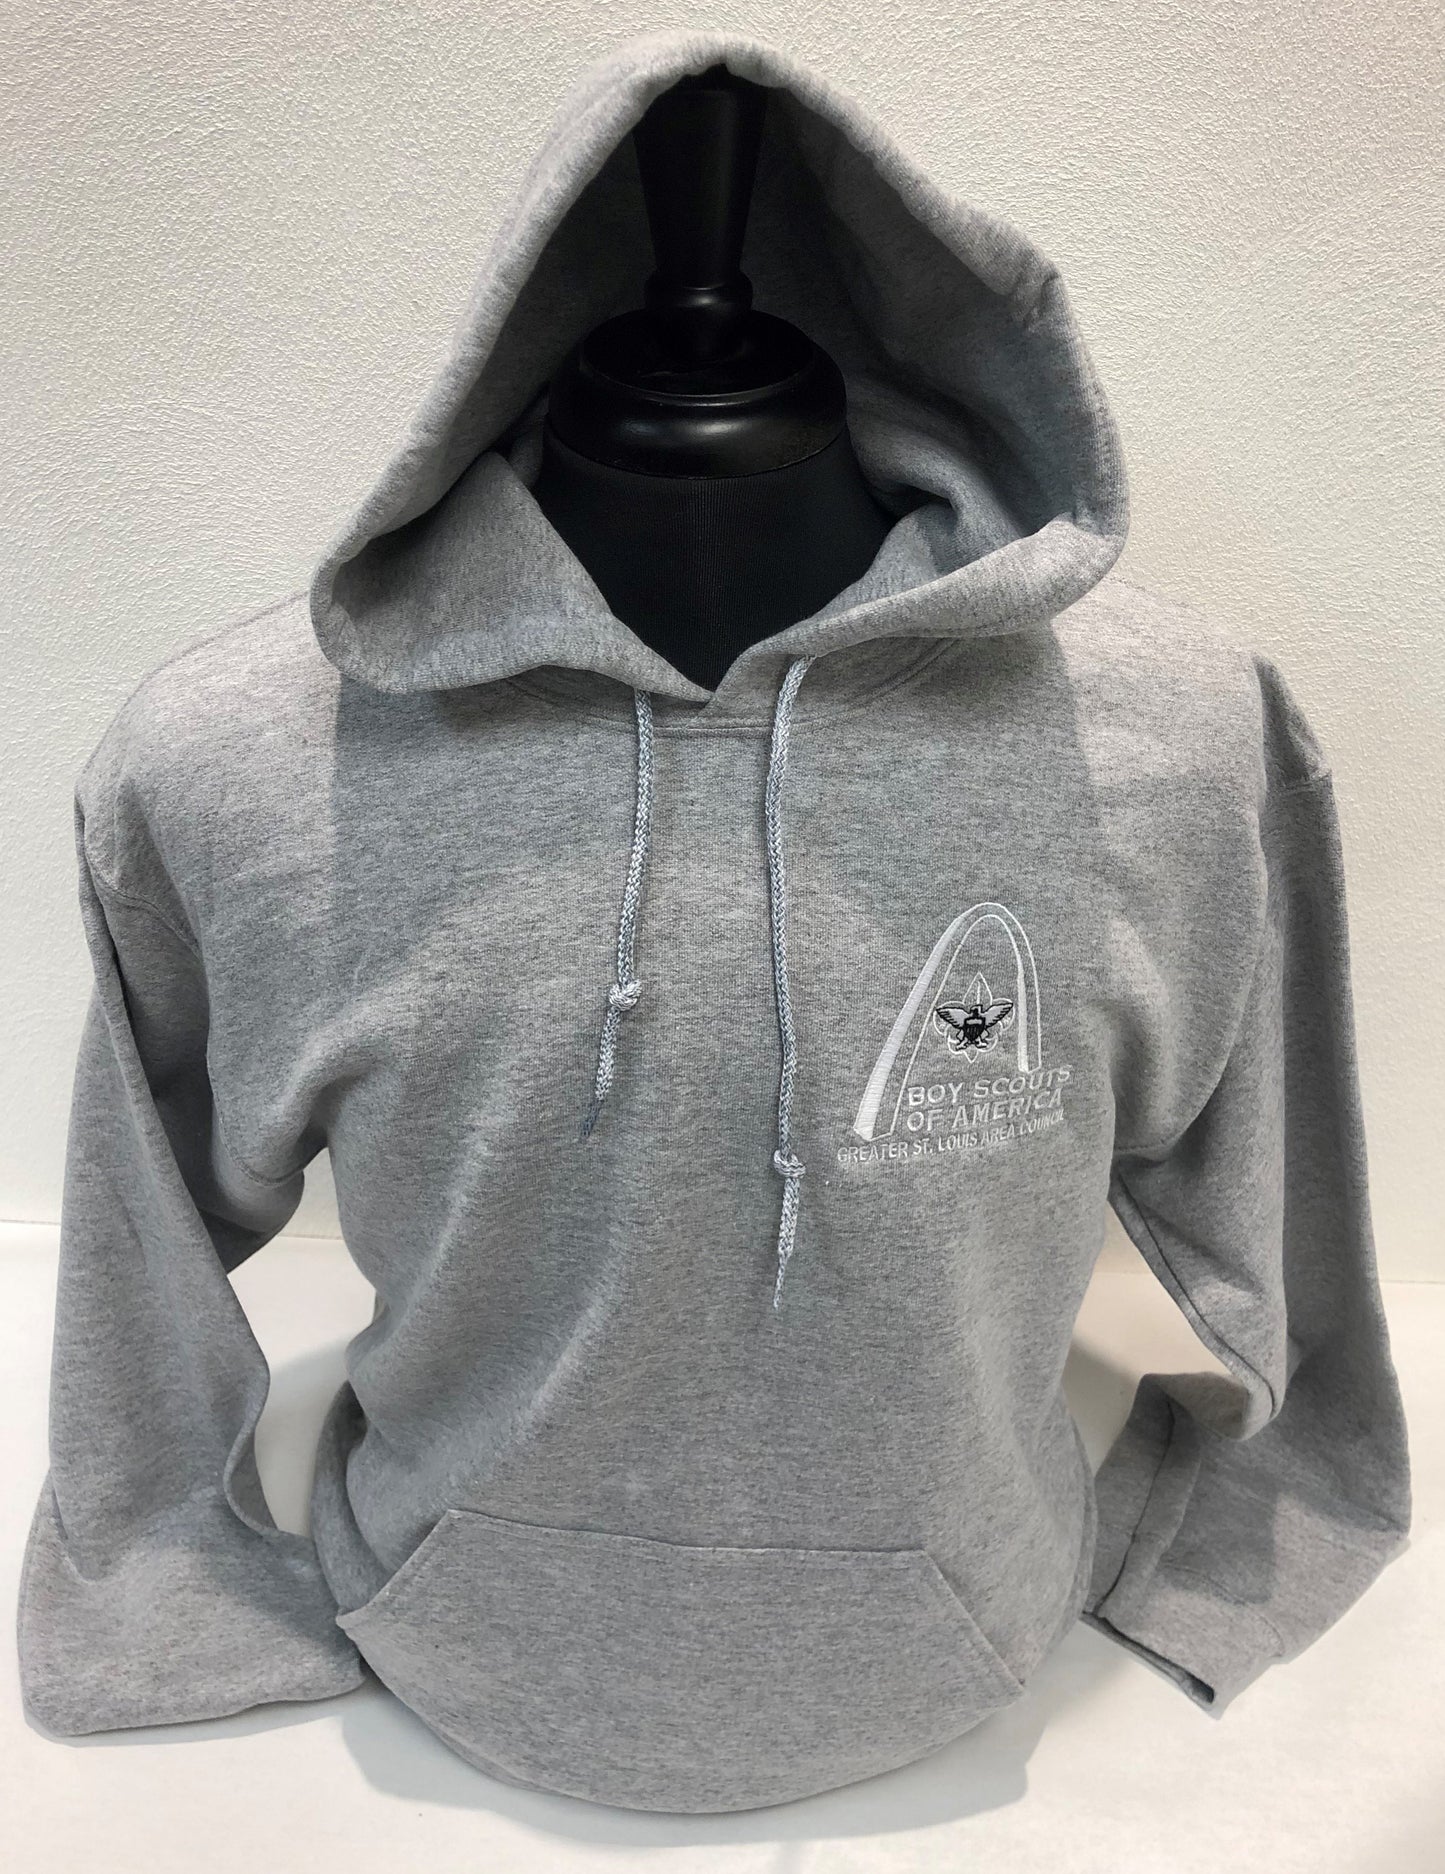 Hoodie - GSLAC Arch - Men's Light Gray - Embroidered Logo